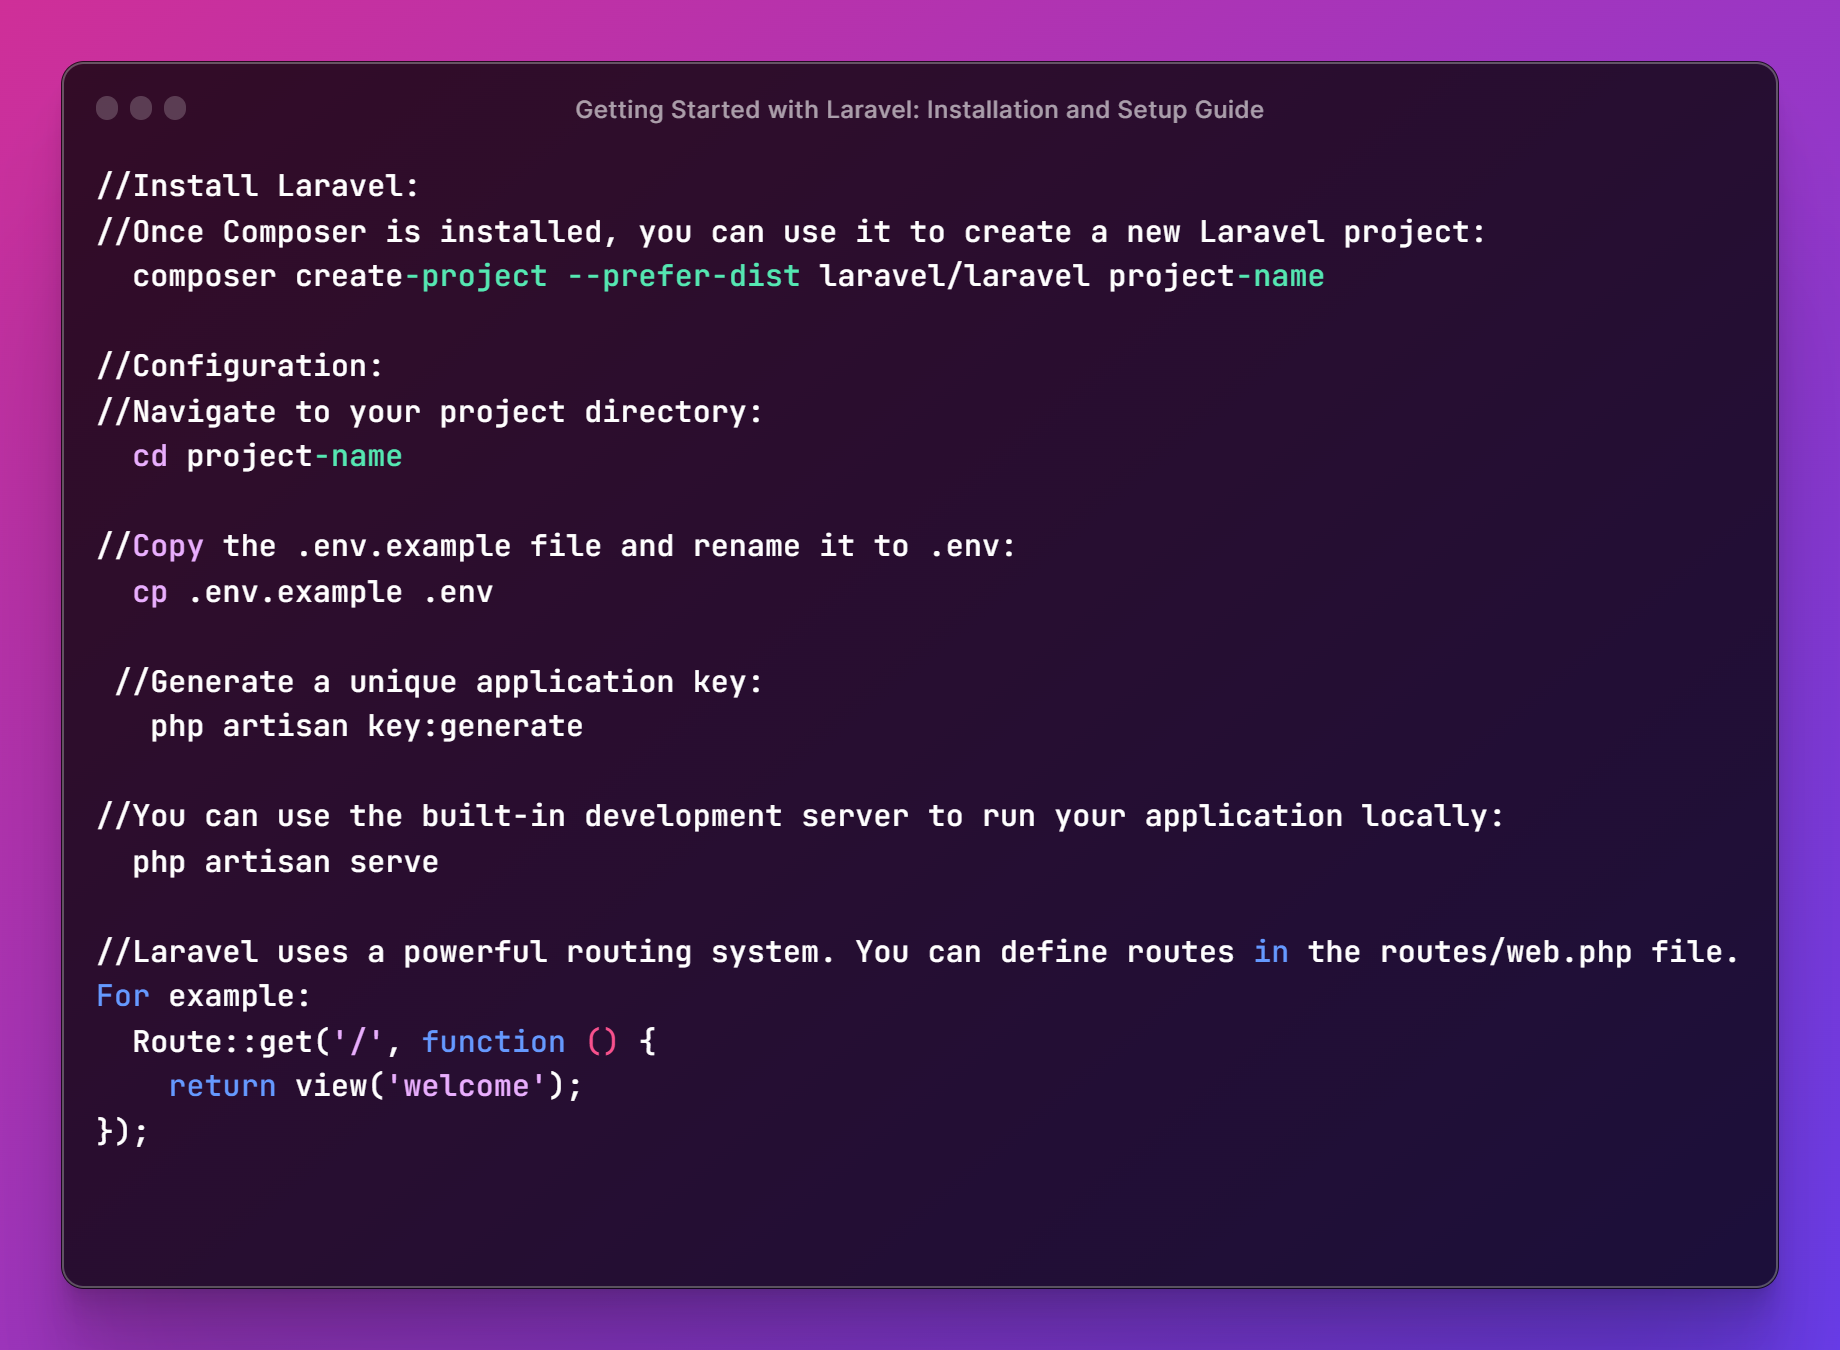 Getting Started with Laravel Code Installation and Setup Guide